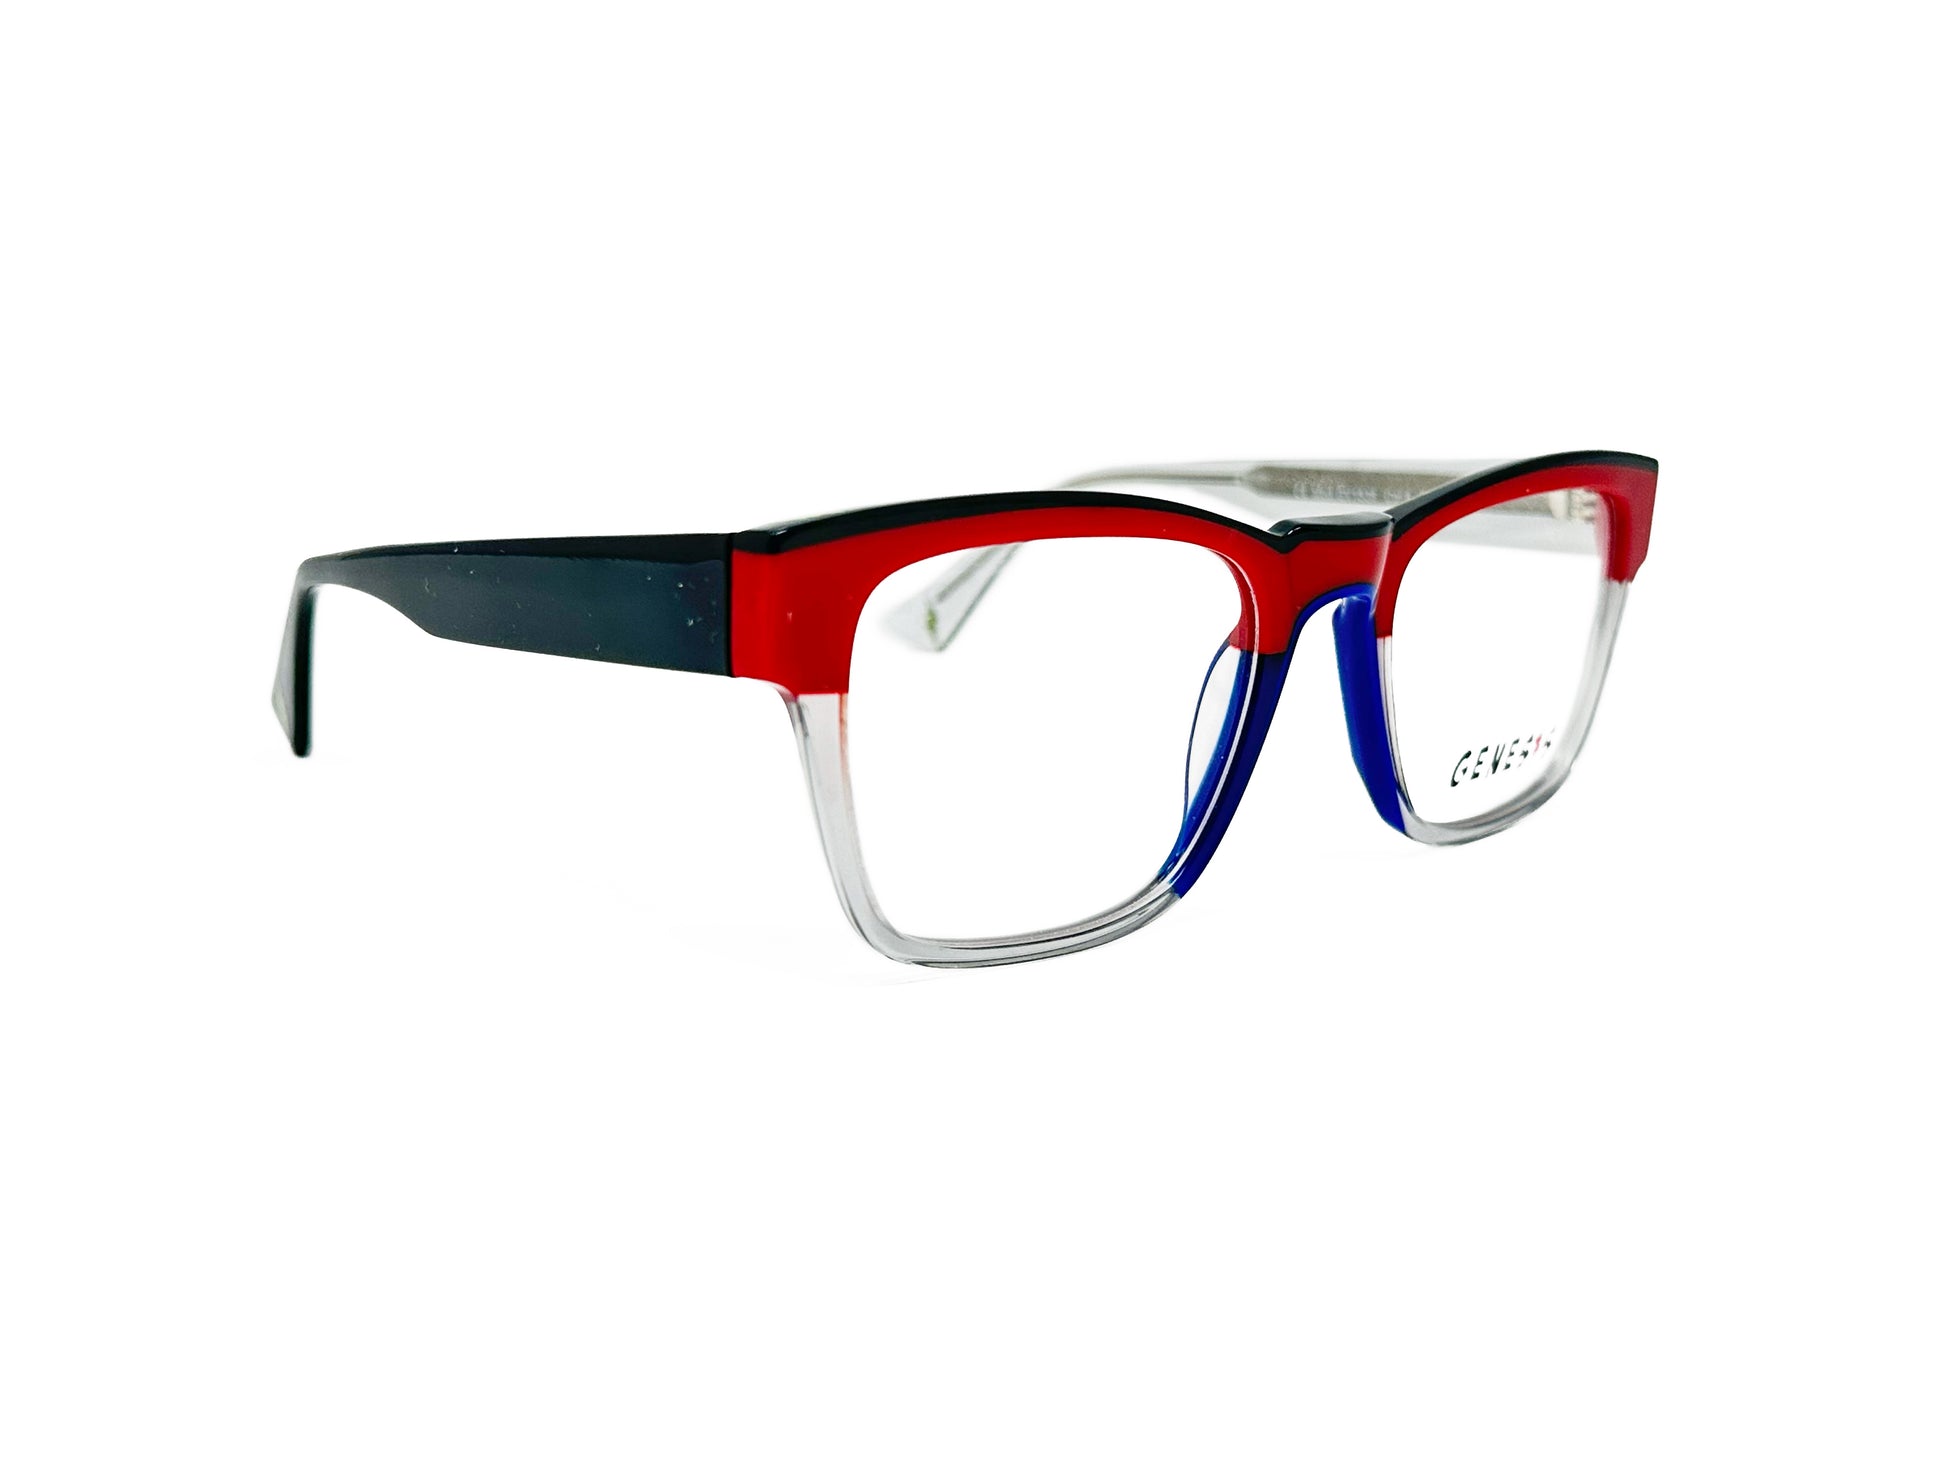 Genesis square, acetate optical frames with a raised bridge. Model: GV1536. Color: 6 - Red with black lining on top and clear transparent on bottom with blue lining along bridge. Side view.